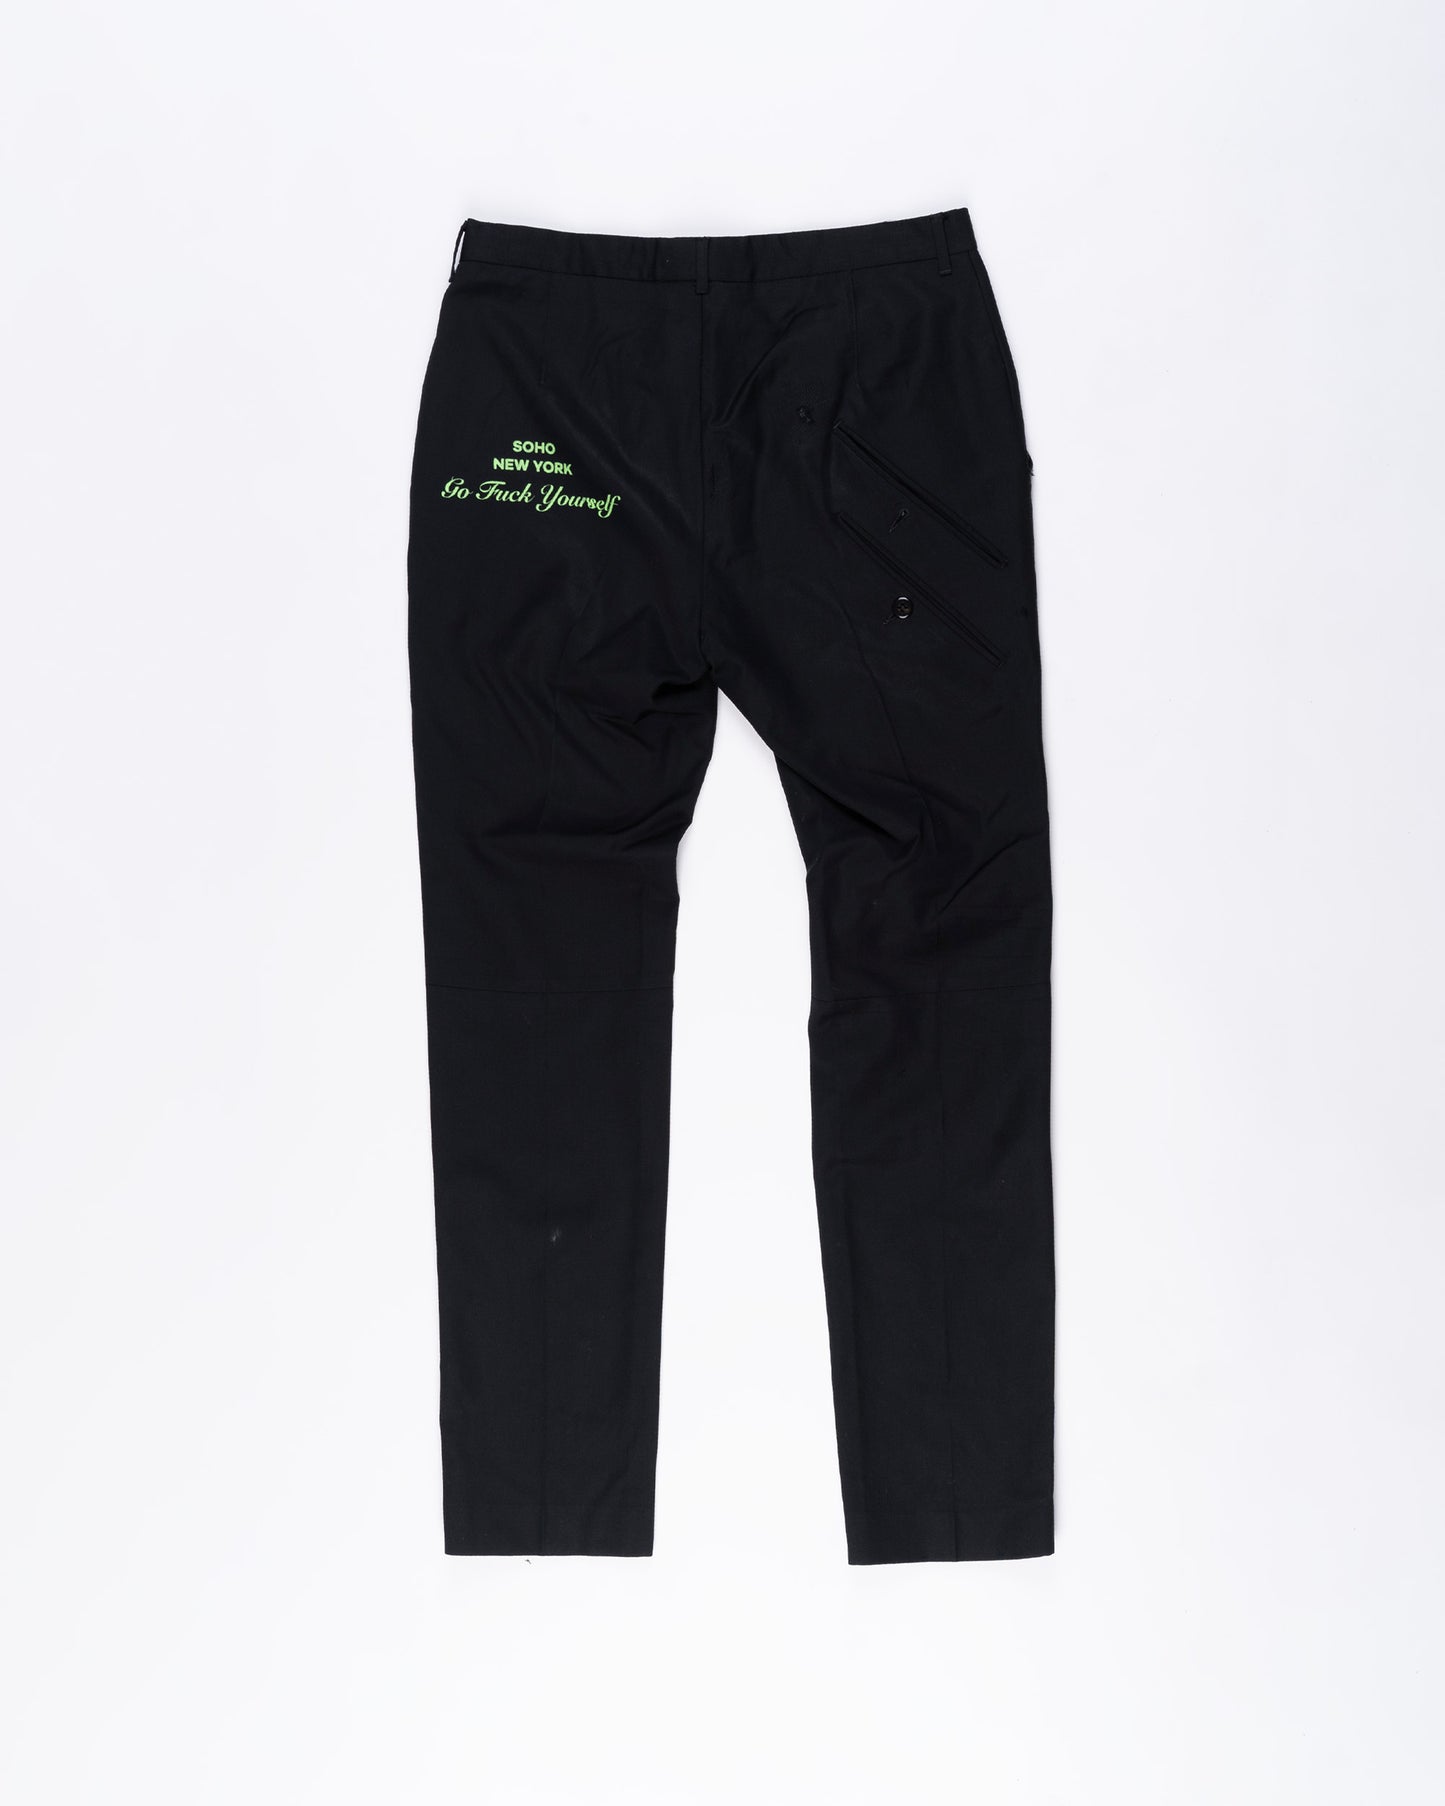 Repaired Black Trousers Size: 32